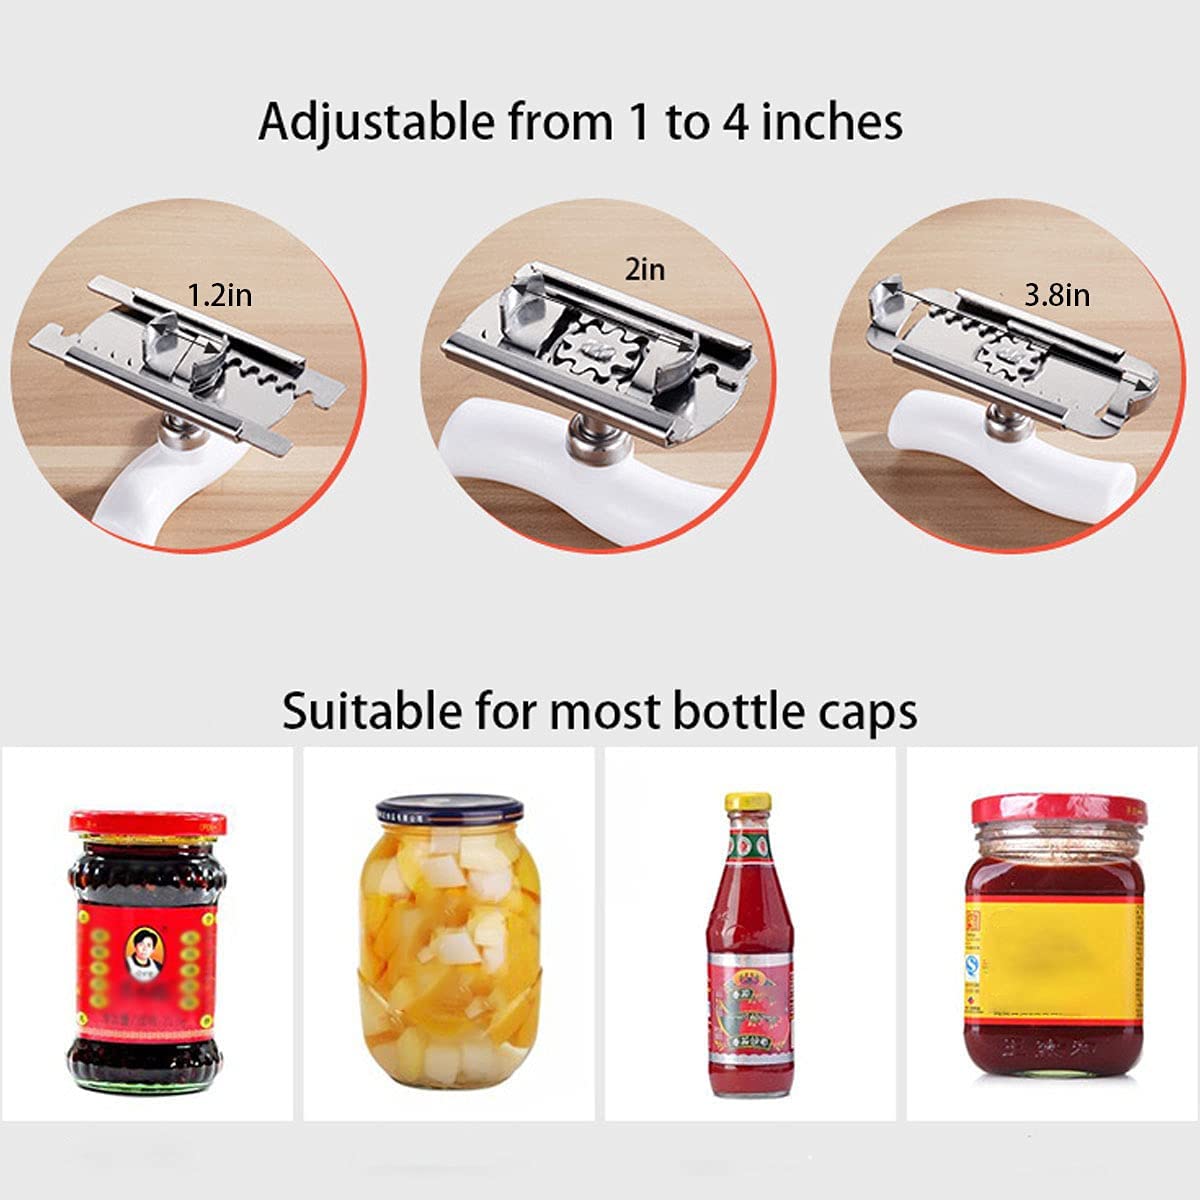 Jar Opener, Stainless Steel Multifunctional Adjustable Can Opener for 1.2-3.8inch Bottles and Jars with Lid, Non-slip Lid Opener Tool for Weak Hand and Seniors with Arthritis